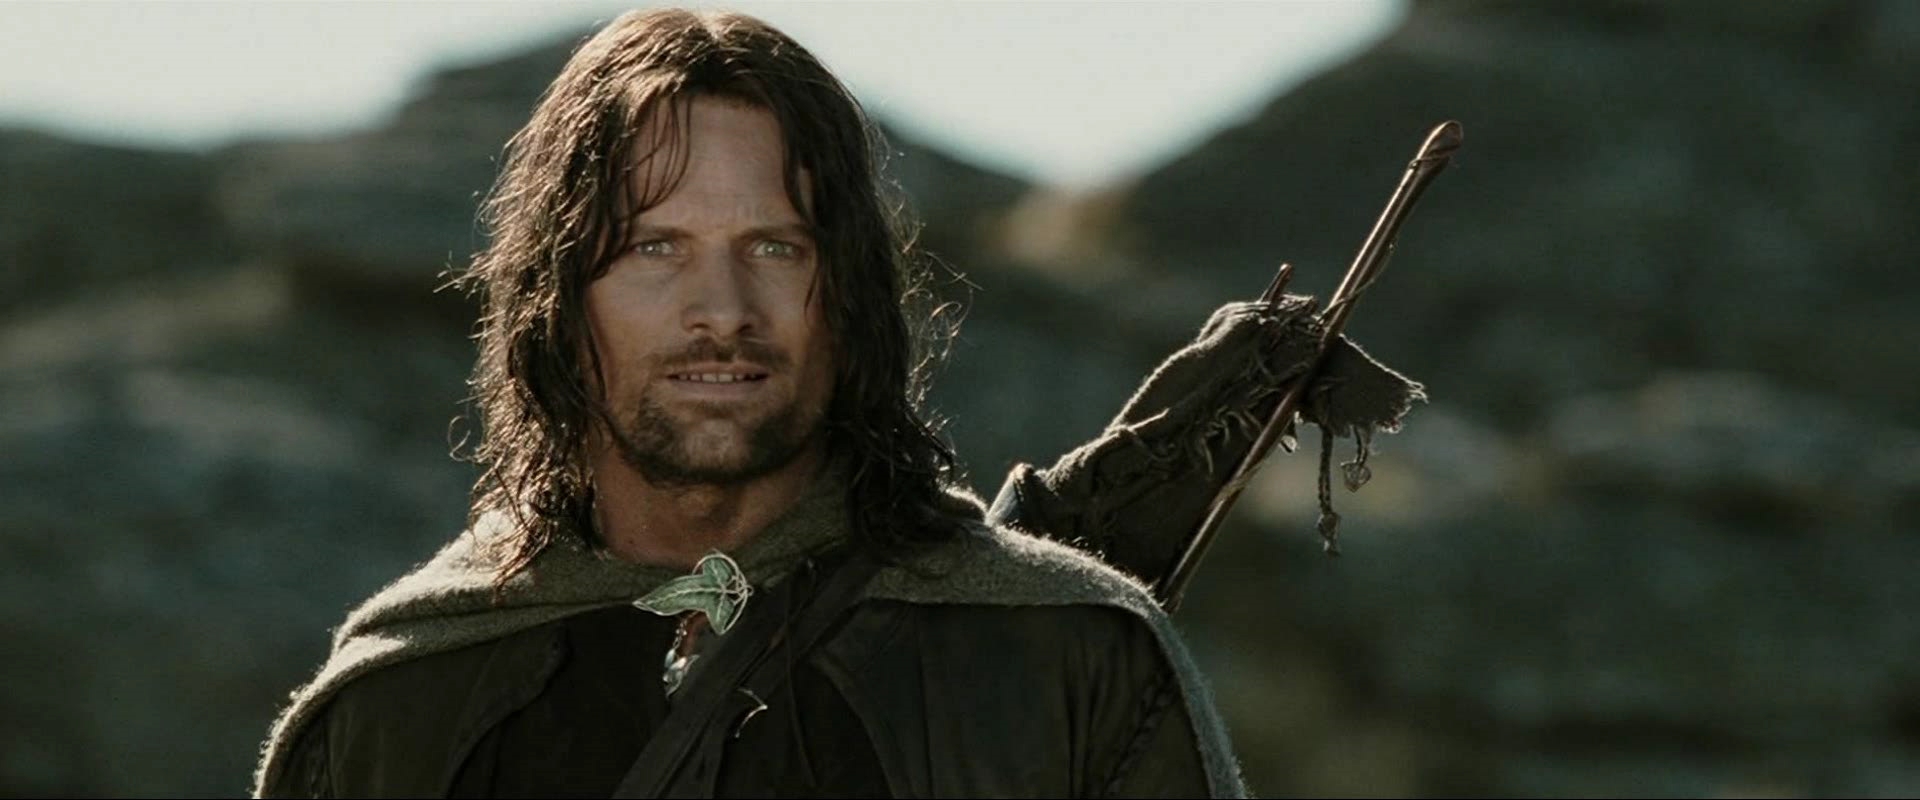 aragorn_two_towers_0.jpg